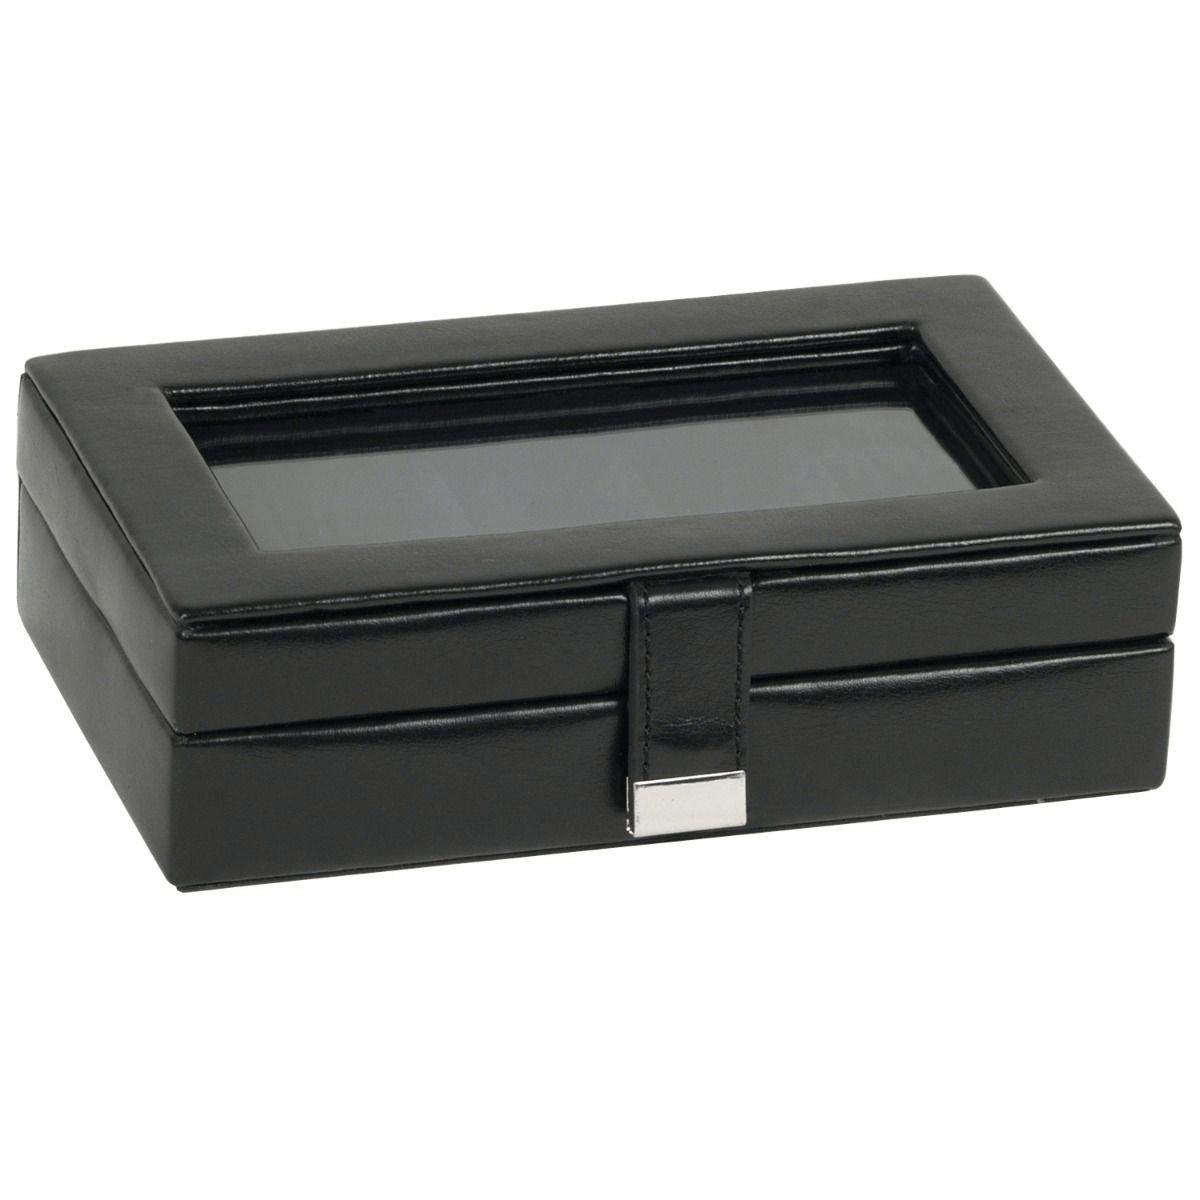 Women's Leather Jewelry Box in Black by Quince